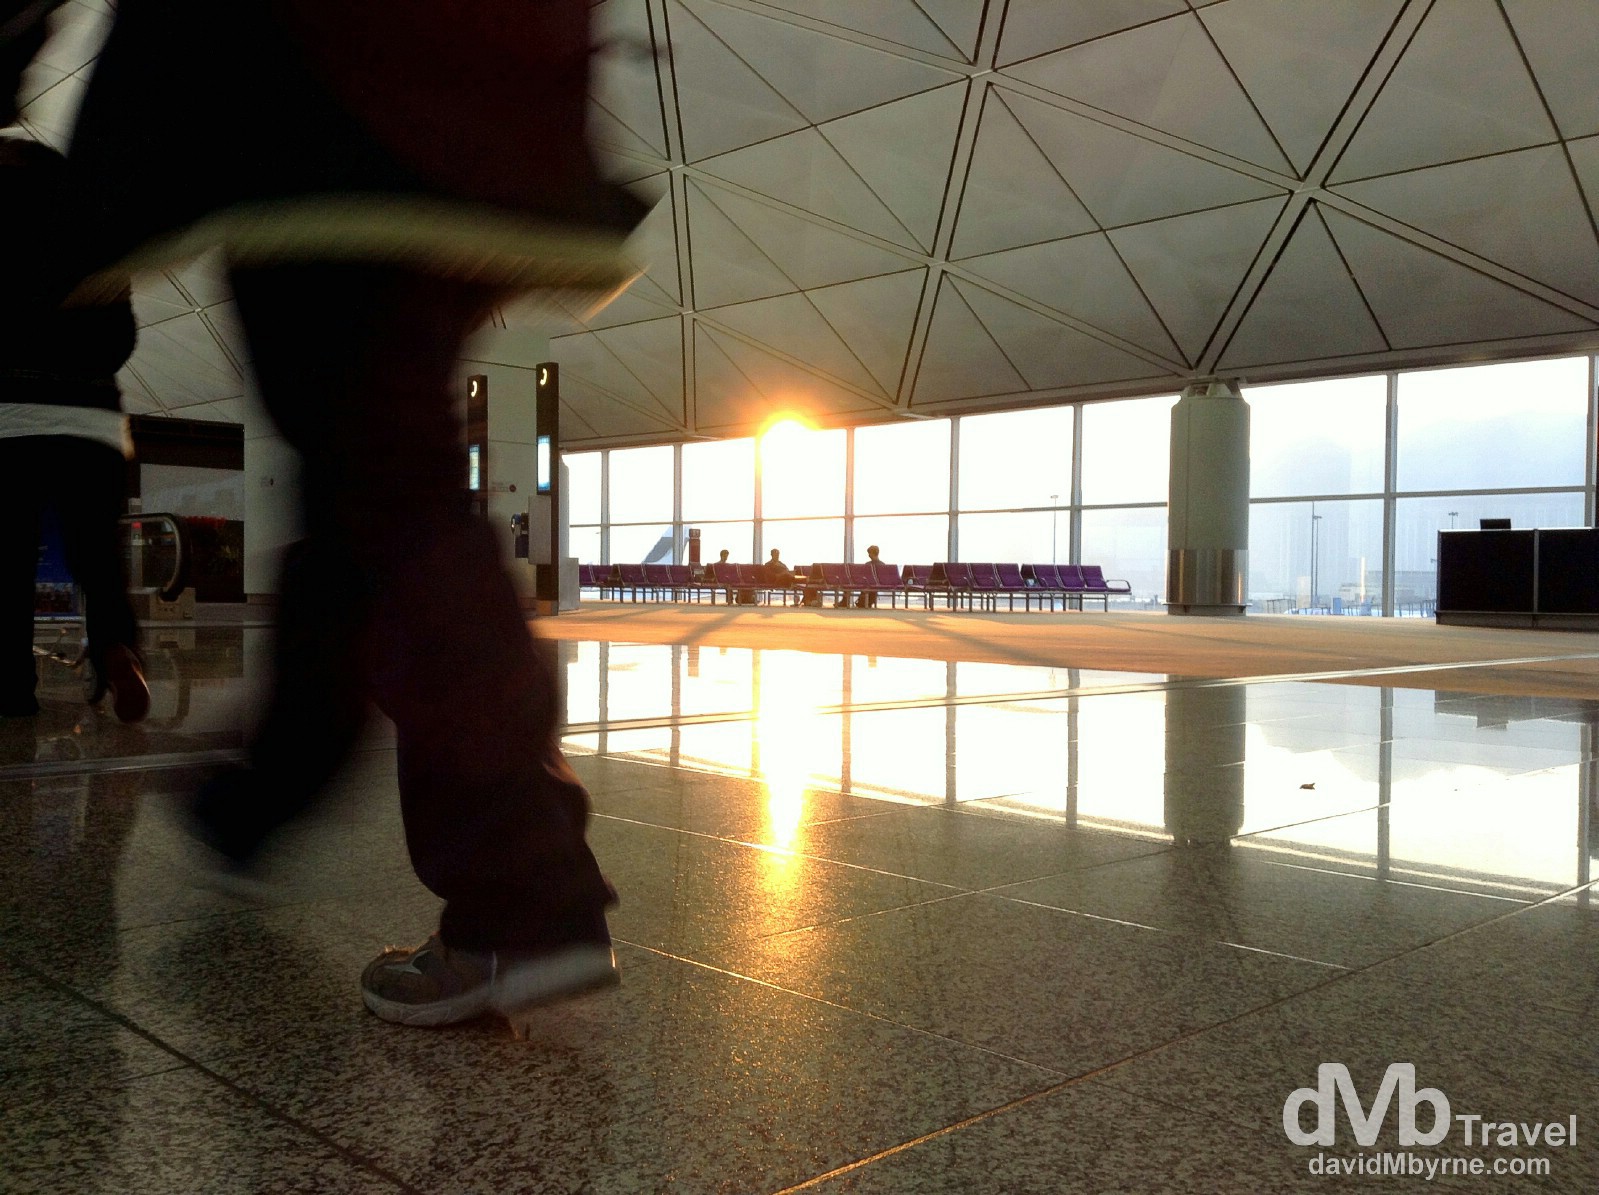 Sunrise as seen from a transit lounge in Hong Kong International Airport en route to Seoul, South Korea. January 17th 2013 (iPod)